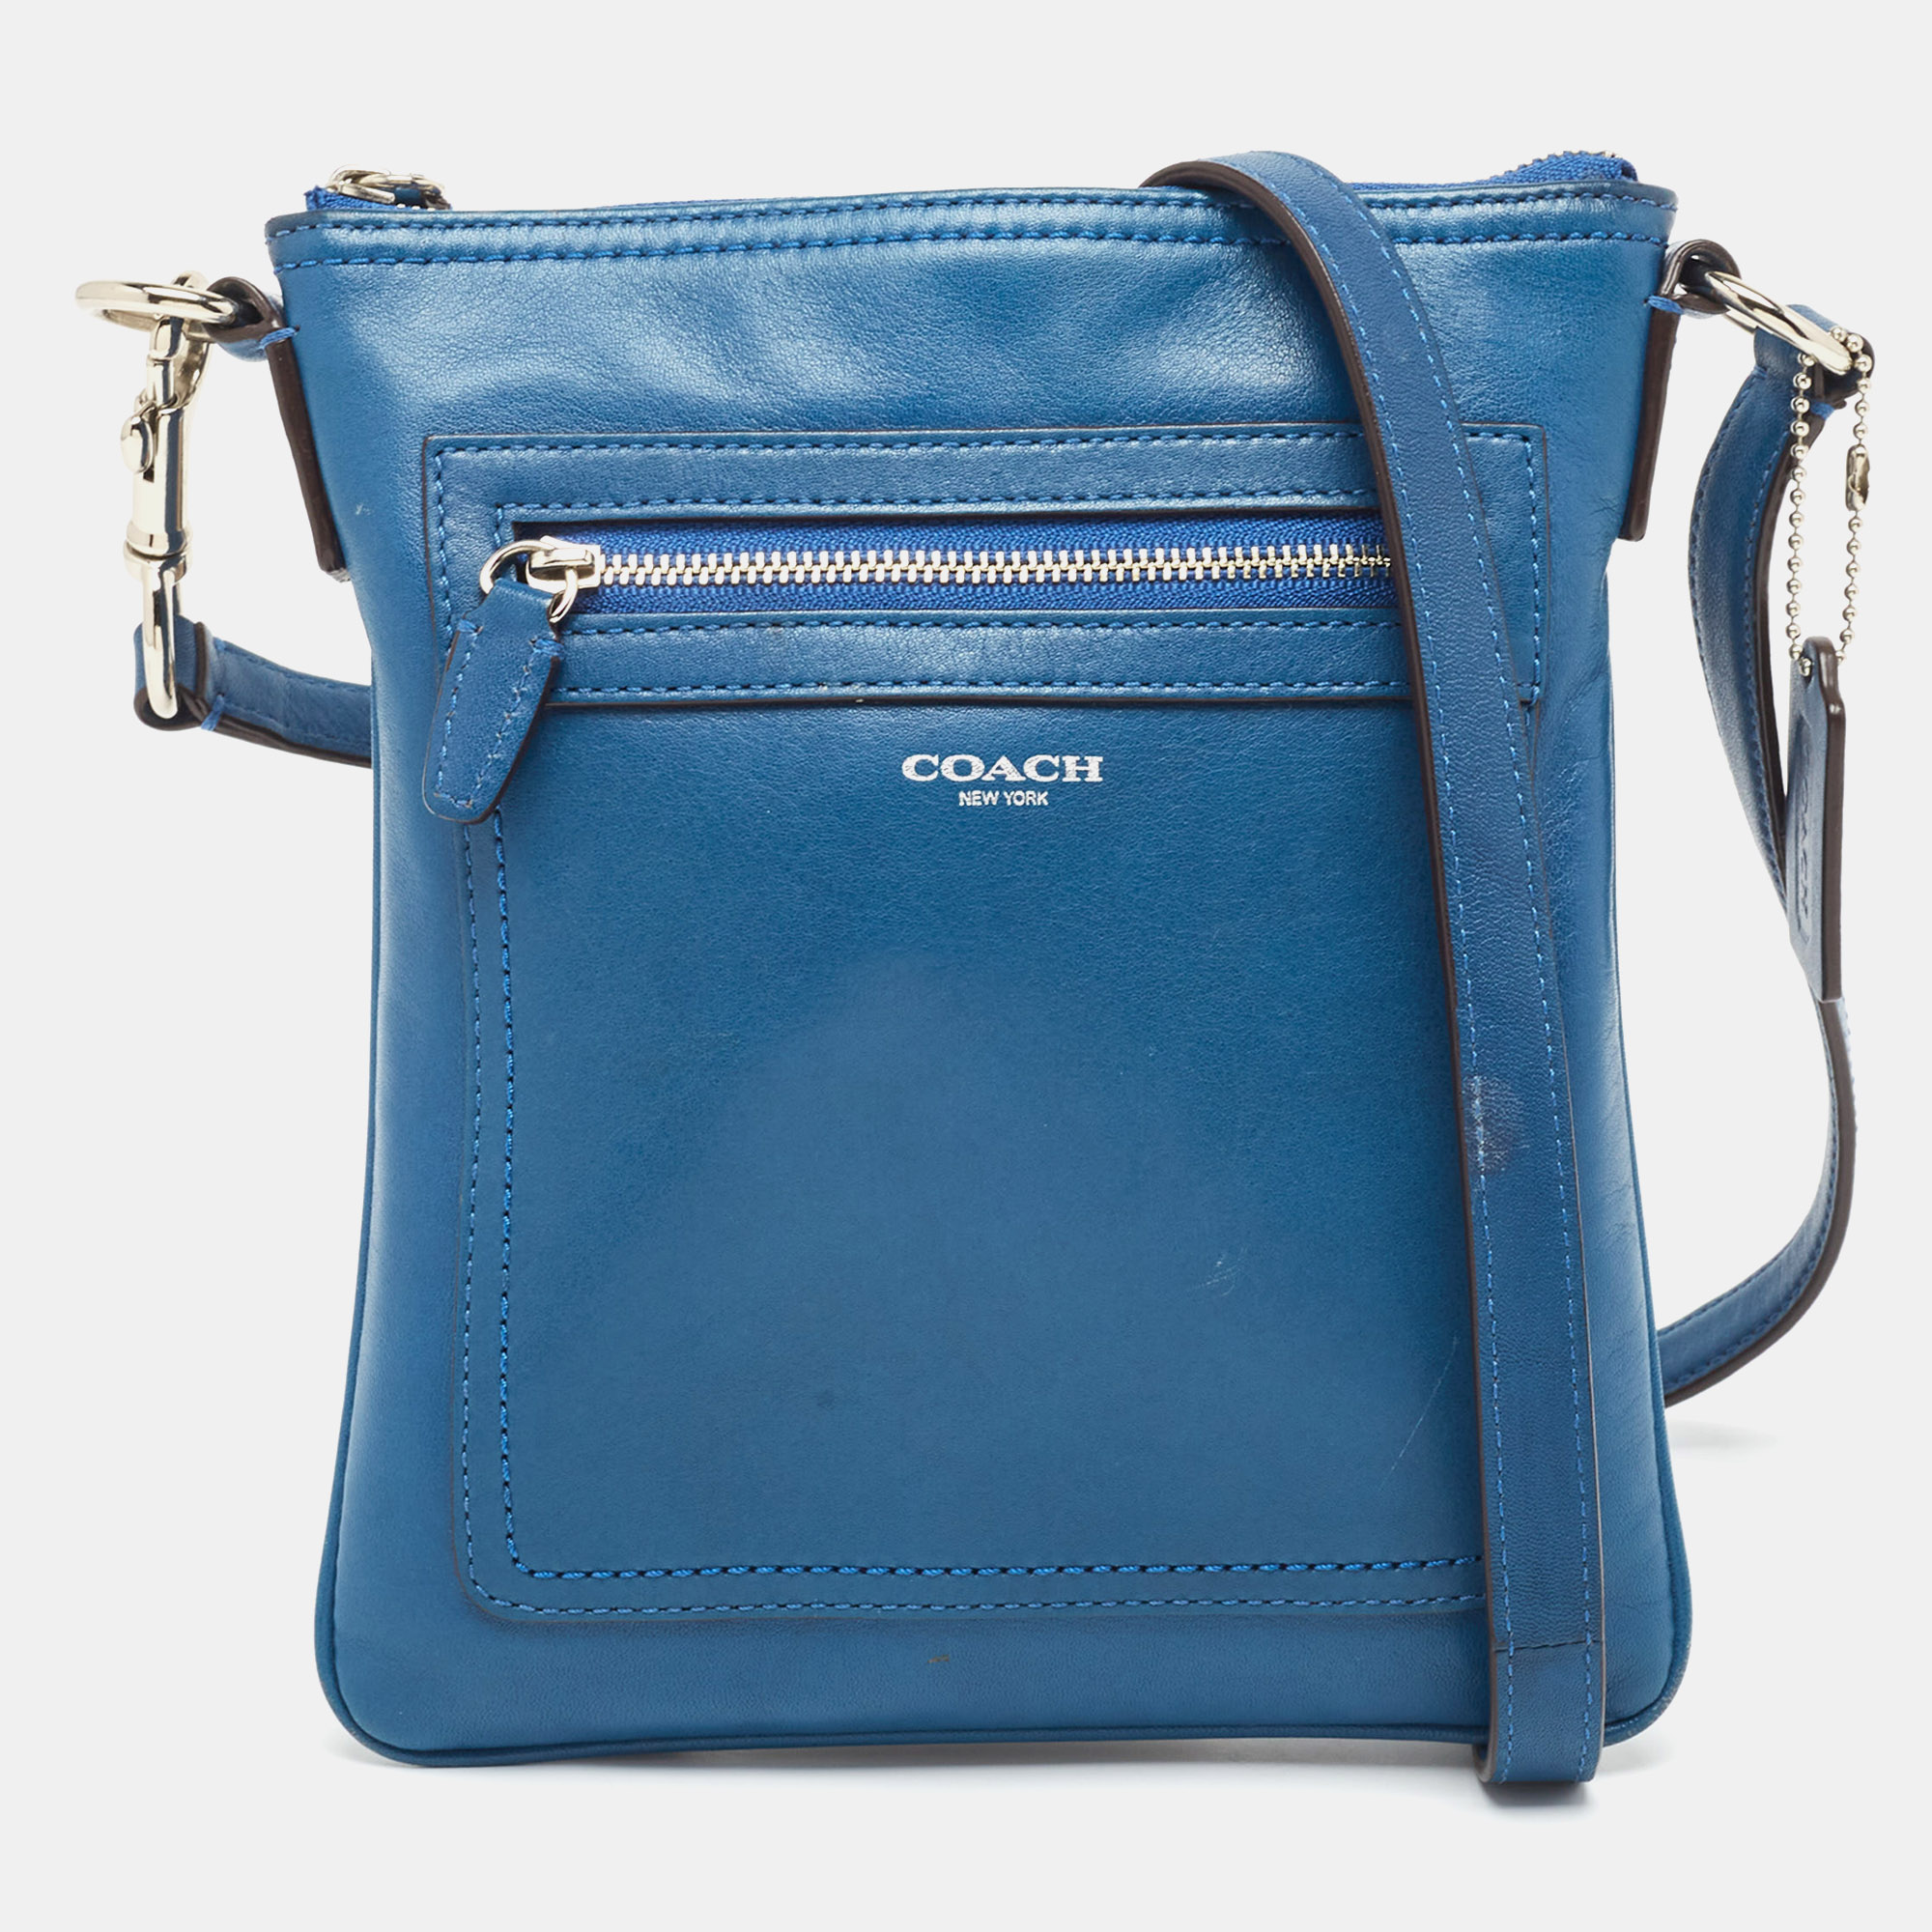 Trust messenger bags to offer functional ease and a comfortable carrying experience. Smartly designed the bag has an appealing exterior and a spacious interior. Perfect for work and weekend getaways.